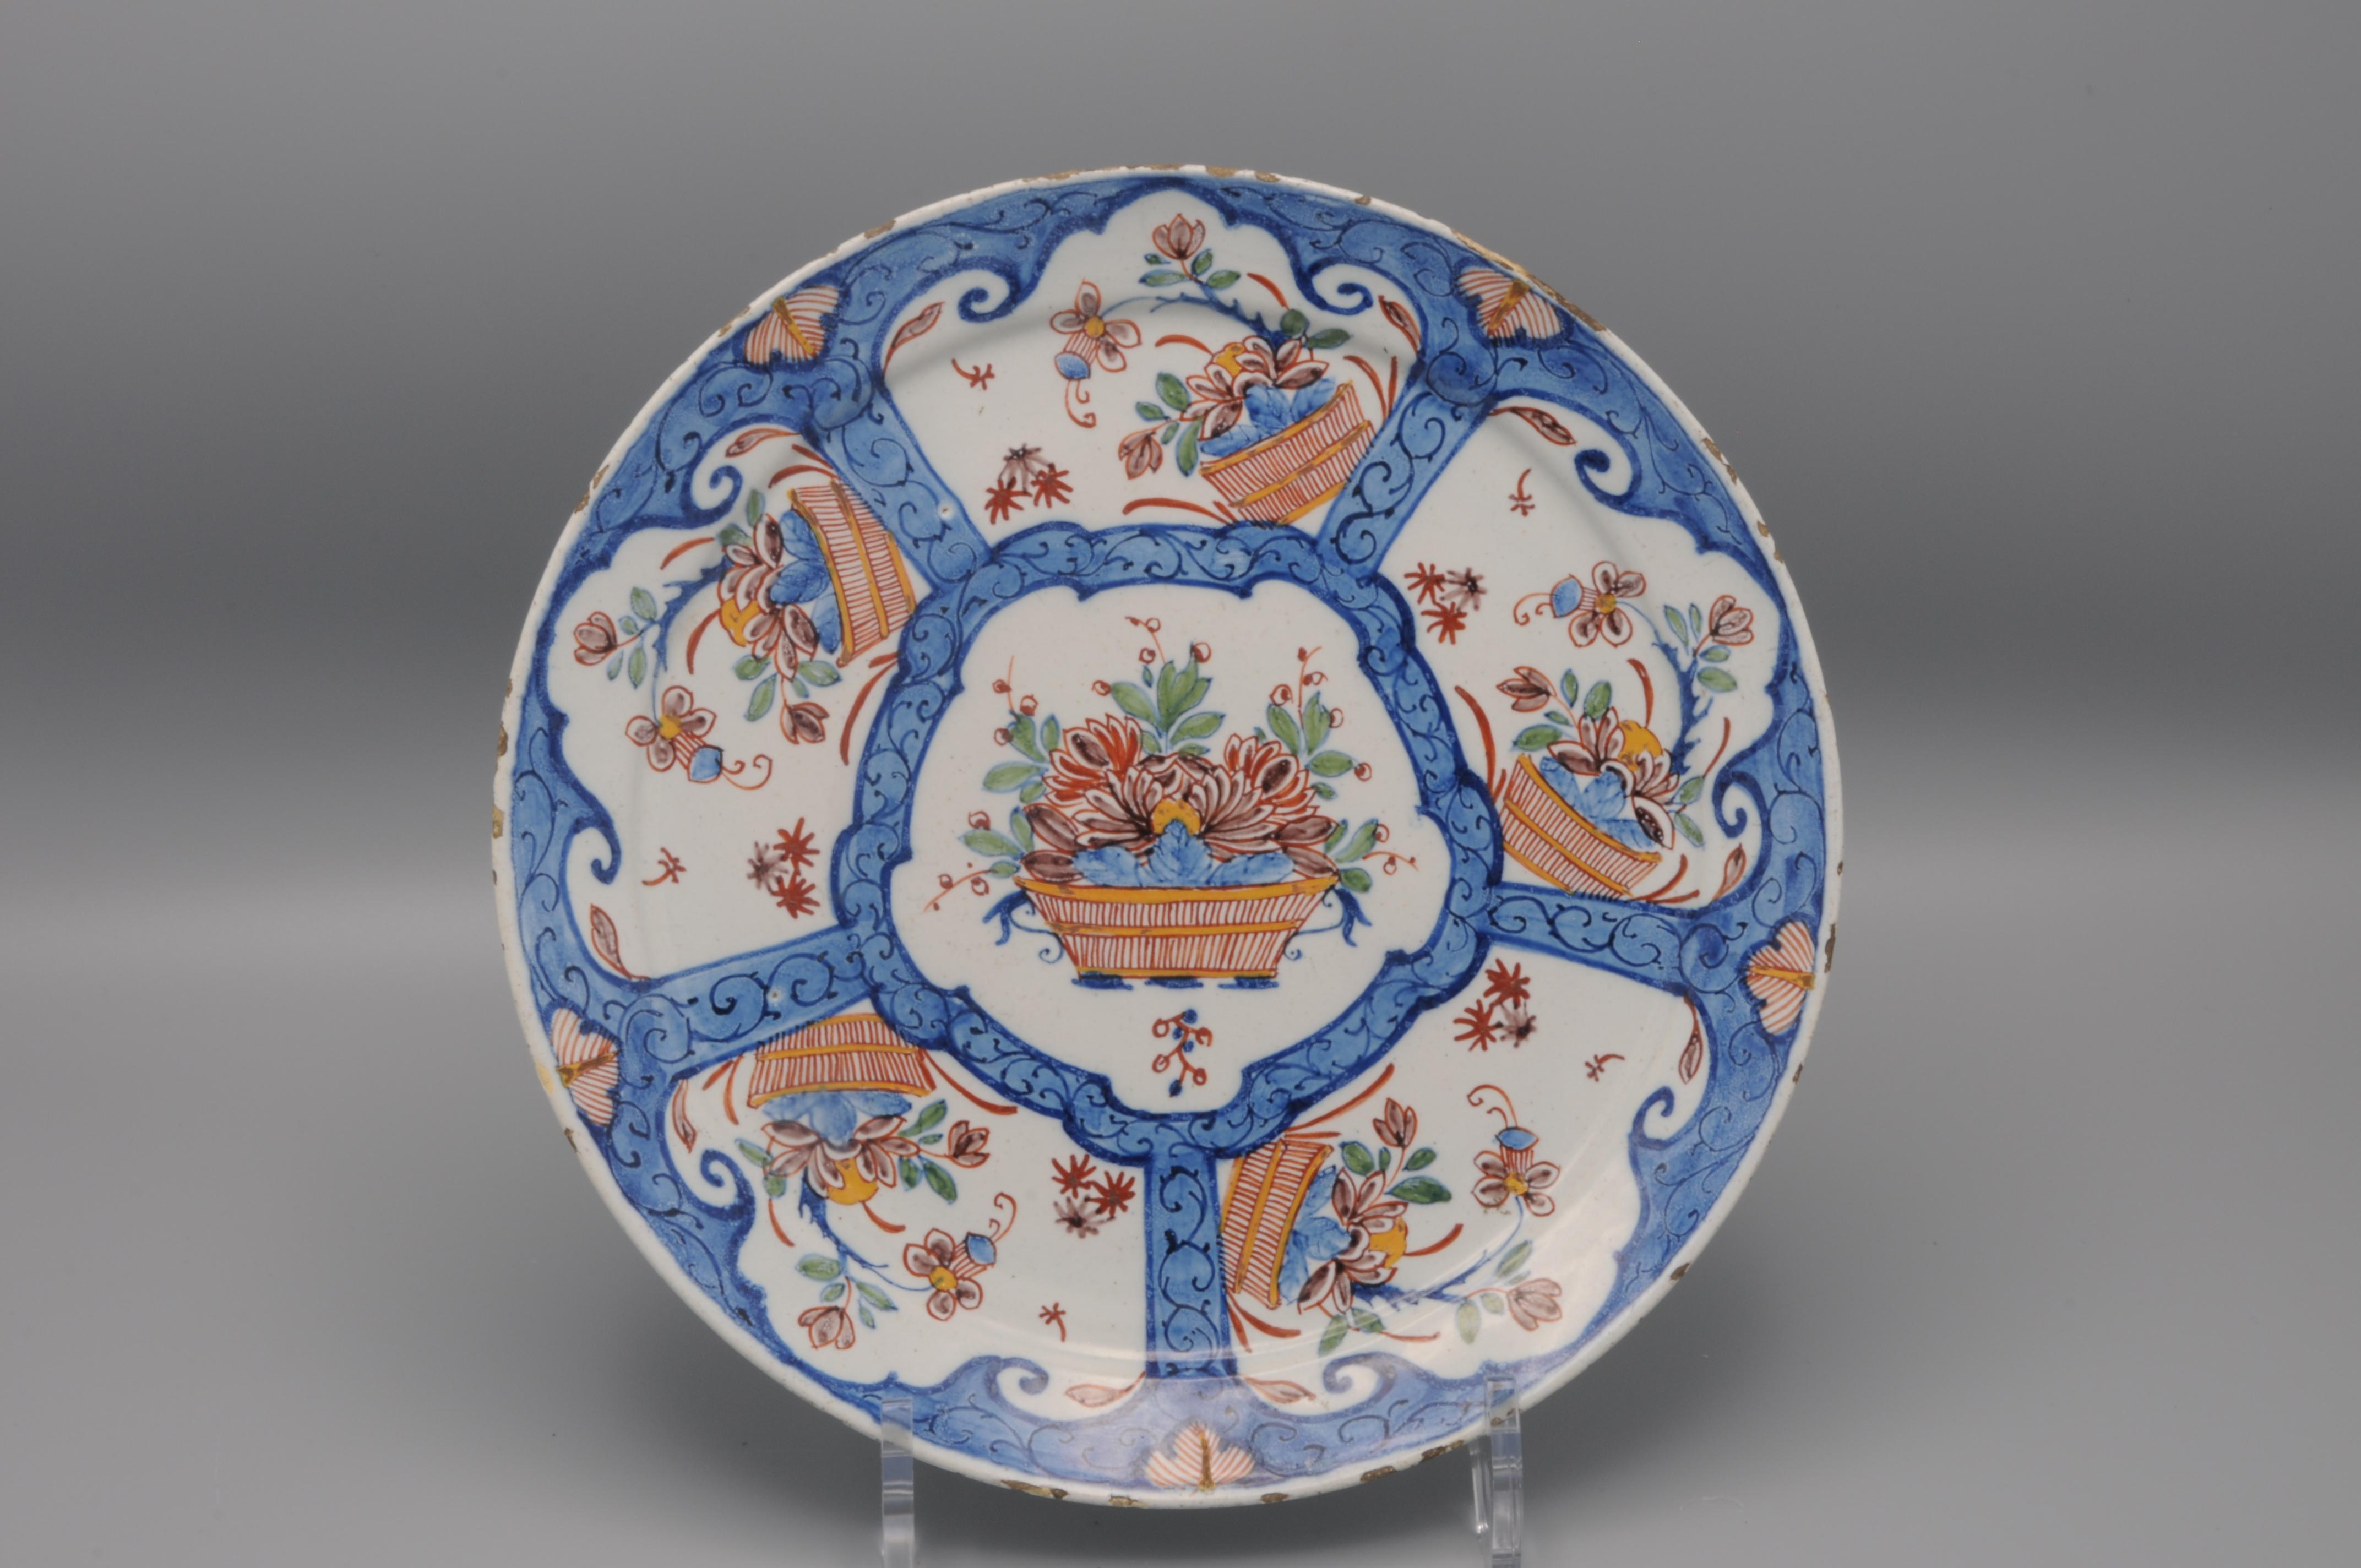 Mid 18th century Blue Delftware plate with central decoration of a flower baskets, surrounded by 5 cartouches with similar decoration. 
Marked 'D' for  Jan Teunis Dextra, owner of De Grieksche A, 1757-1765
Excellent quality of painting
Good